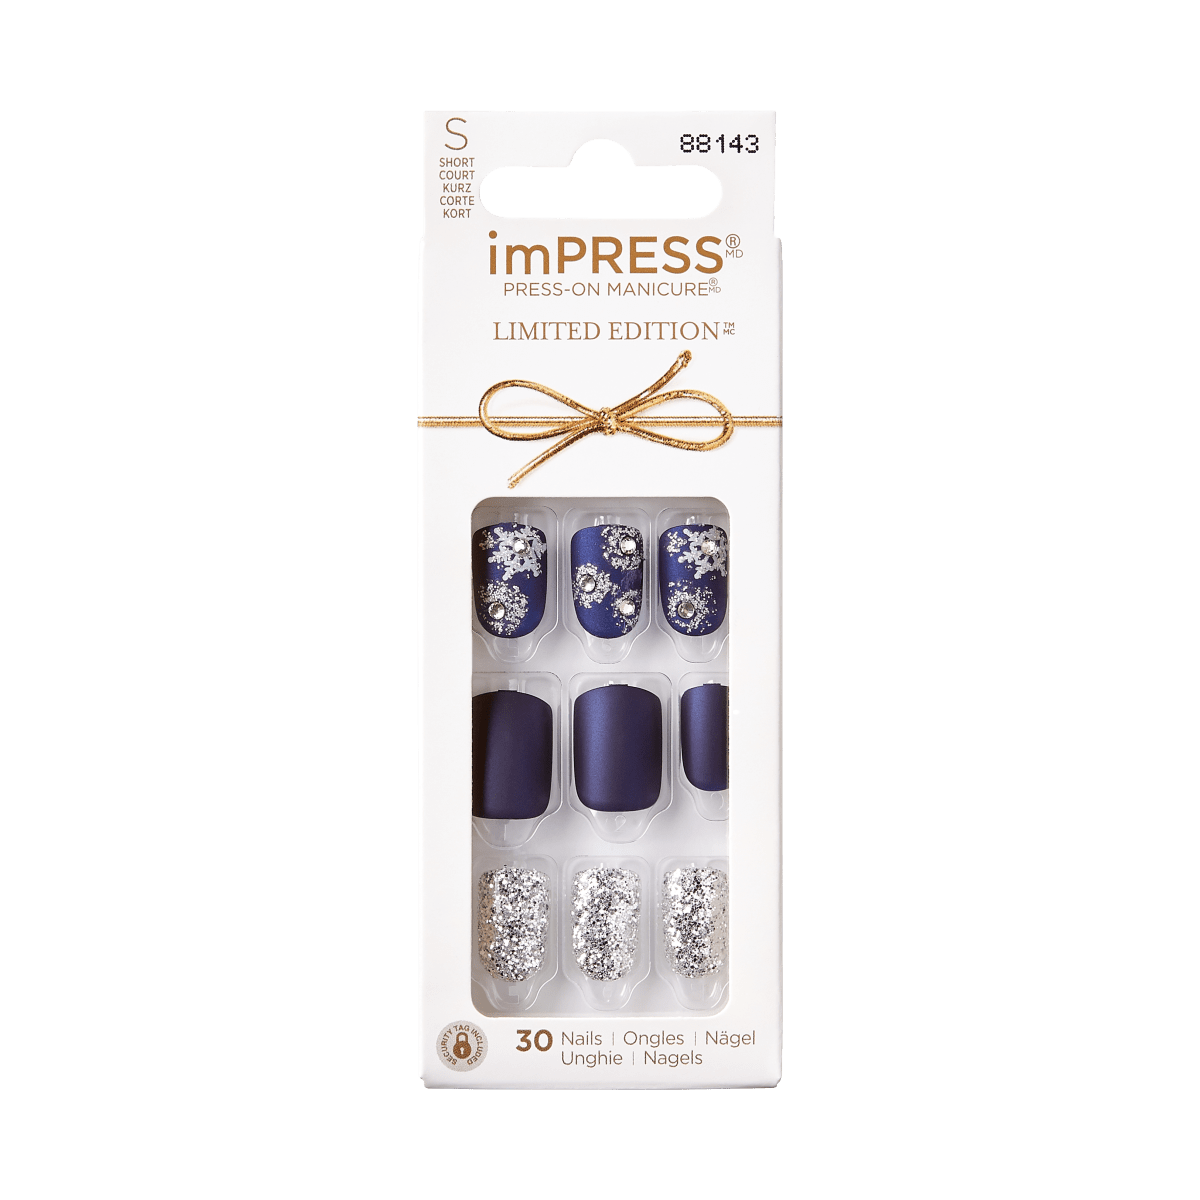 imPRESS Limited-Edition Holiday Press-On Nails - Feeling Pine